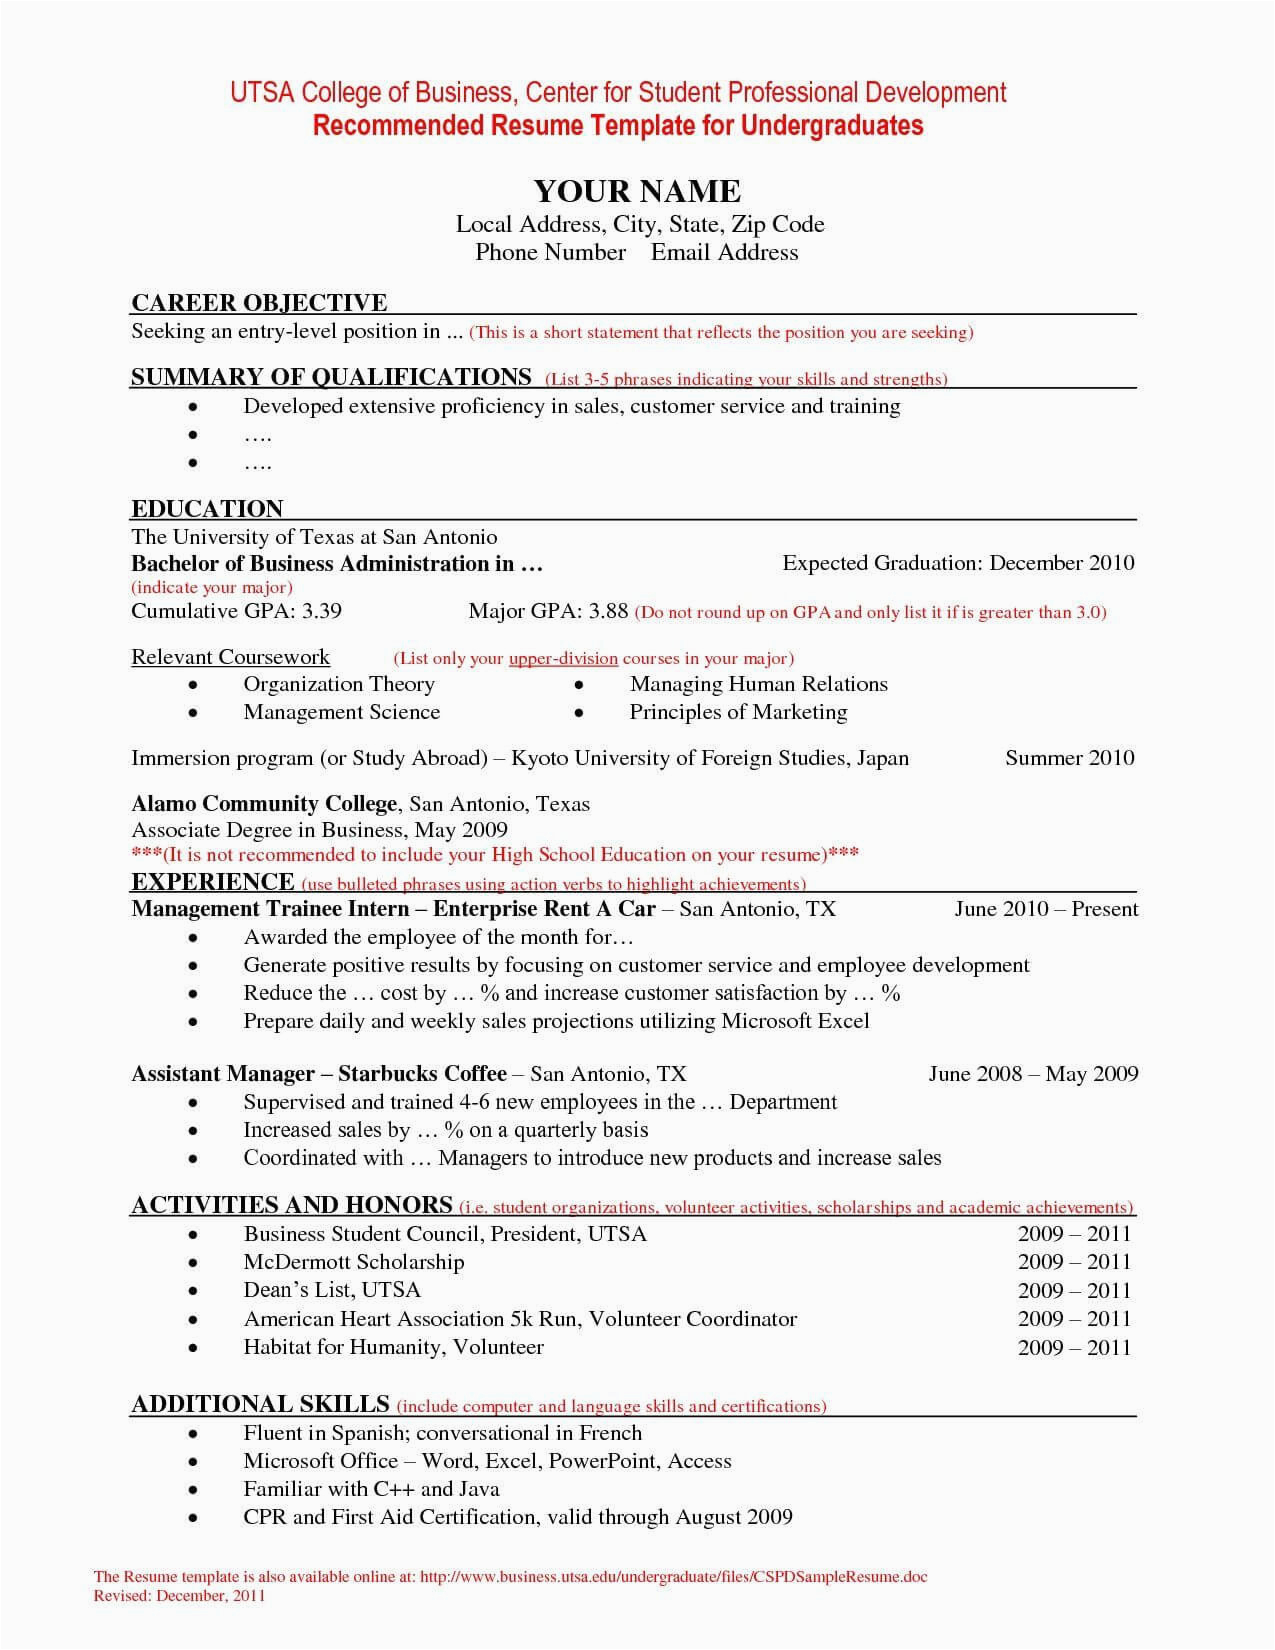 Chronological Resume Sample for College Student College Student Resume Template Microsoft Word